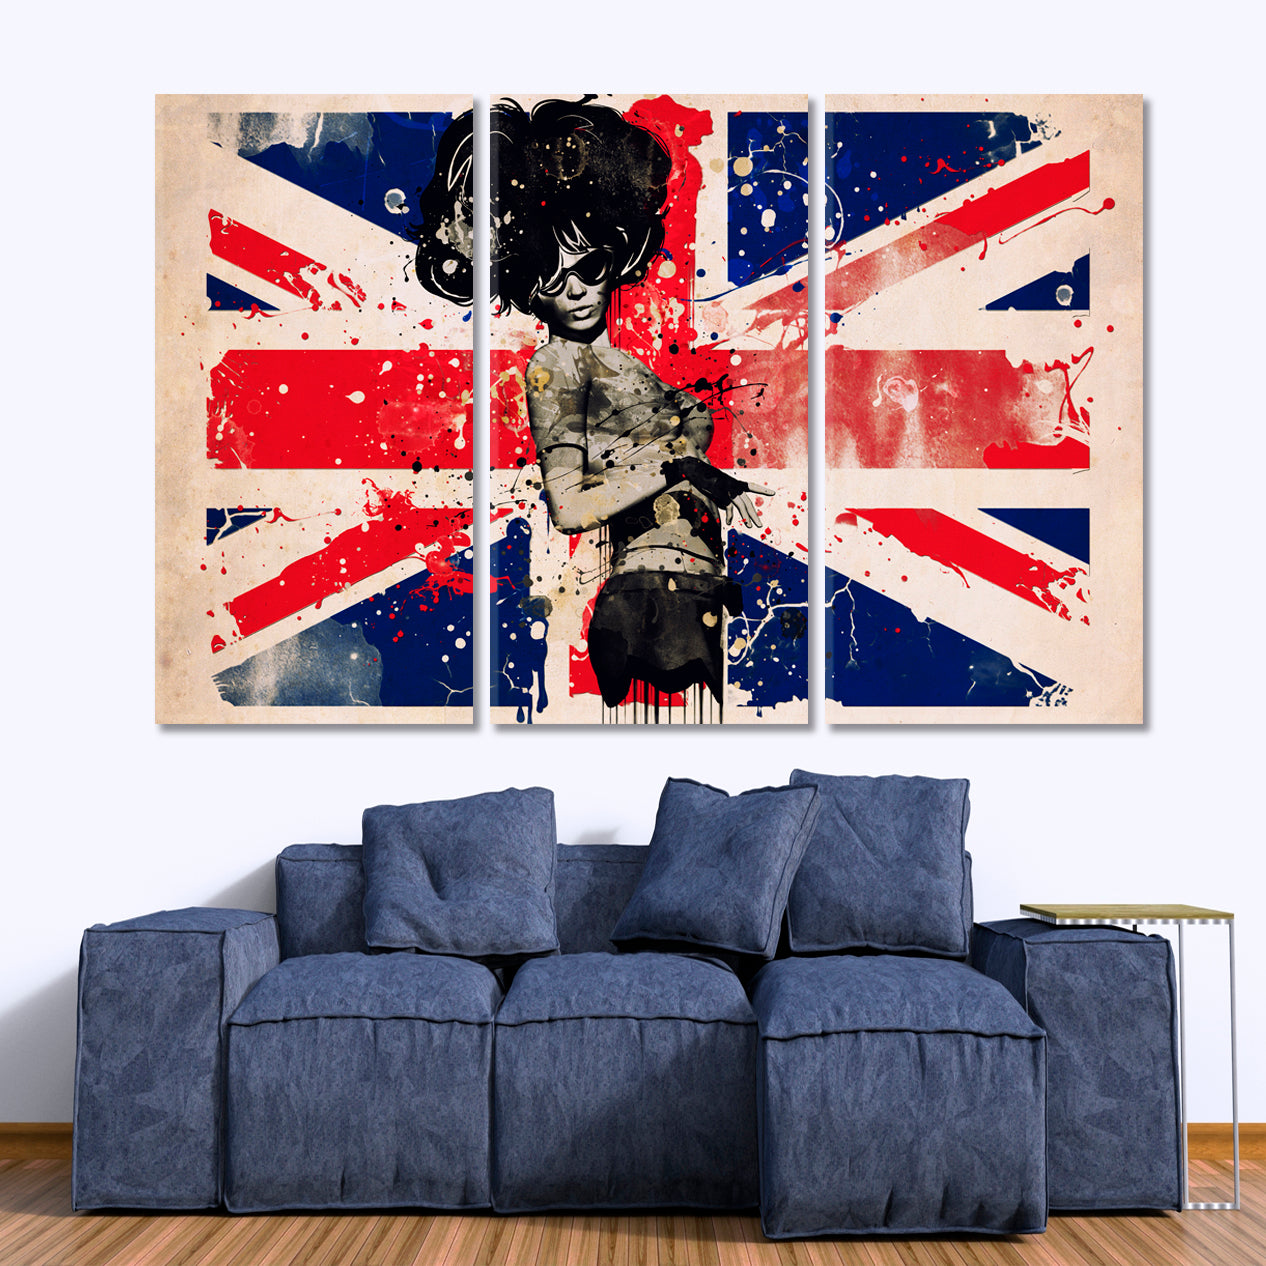 Fashion Woman British Flag Modern Grunge Style Posters, Flags Giclee Print Artesty 3 panels 36" x 24" 